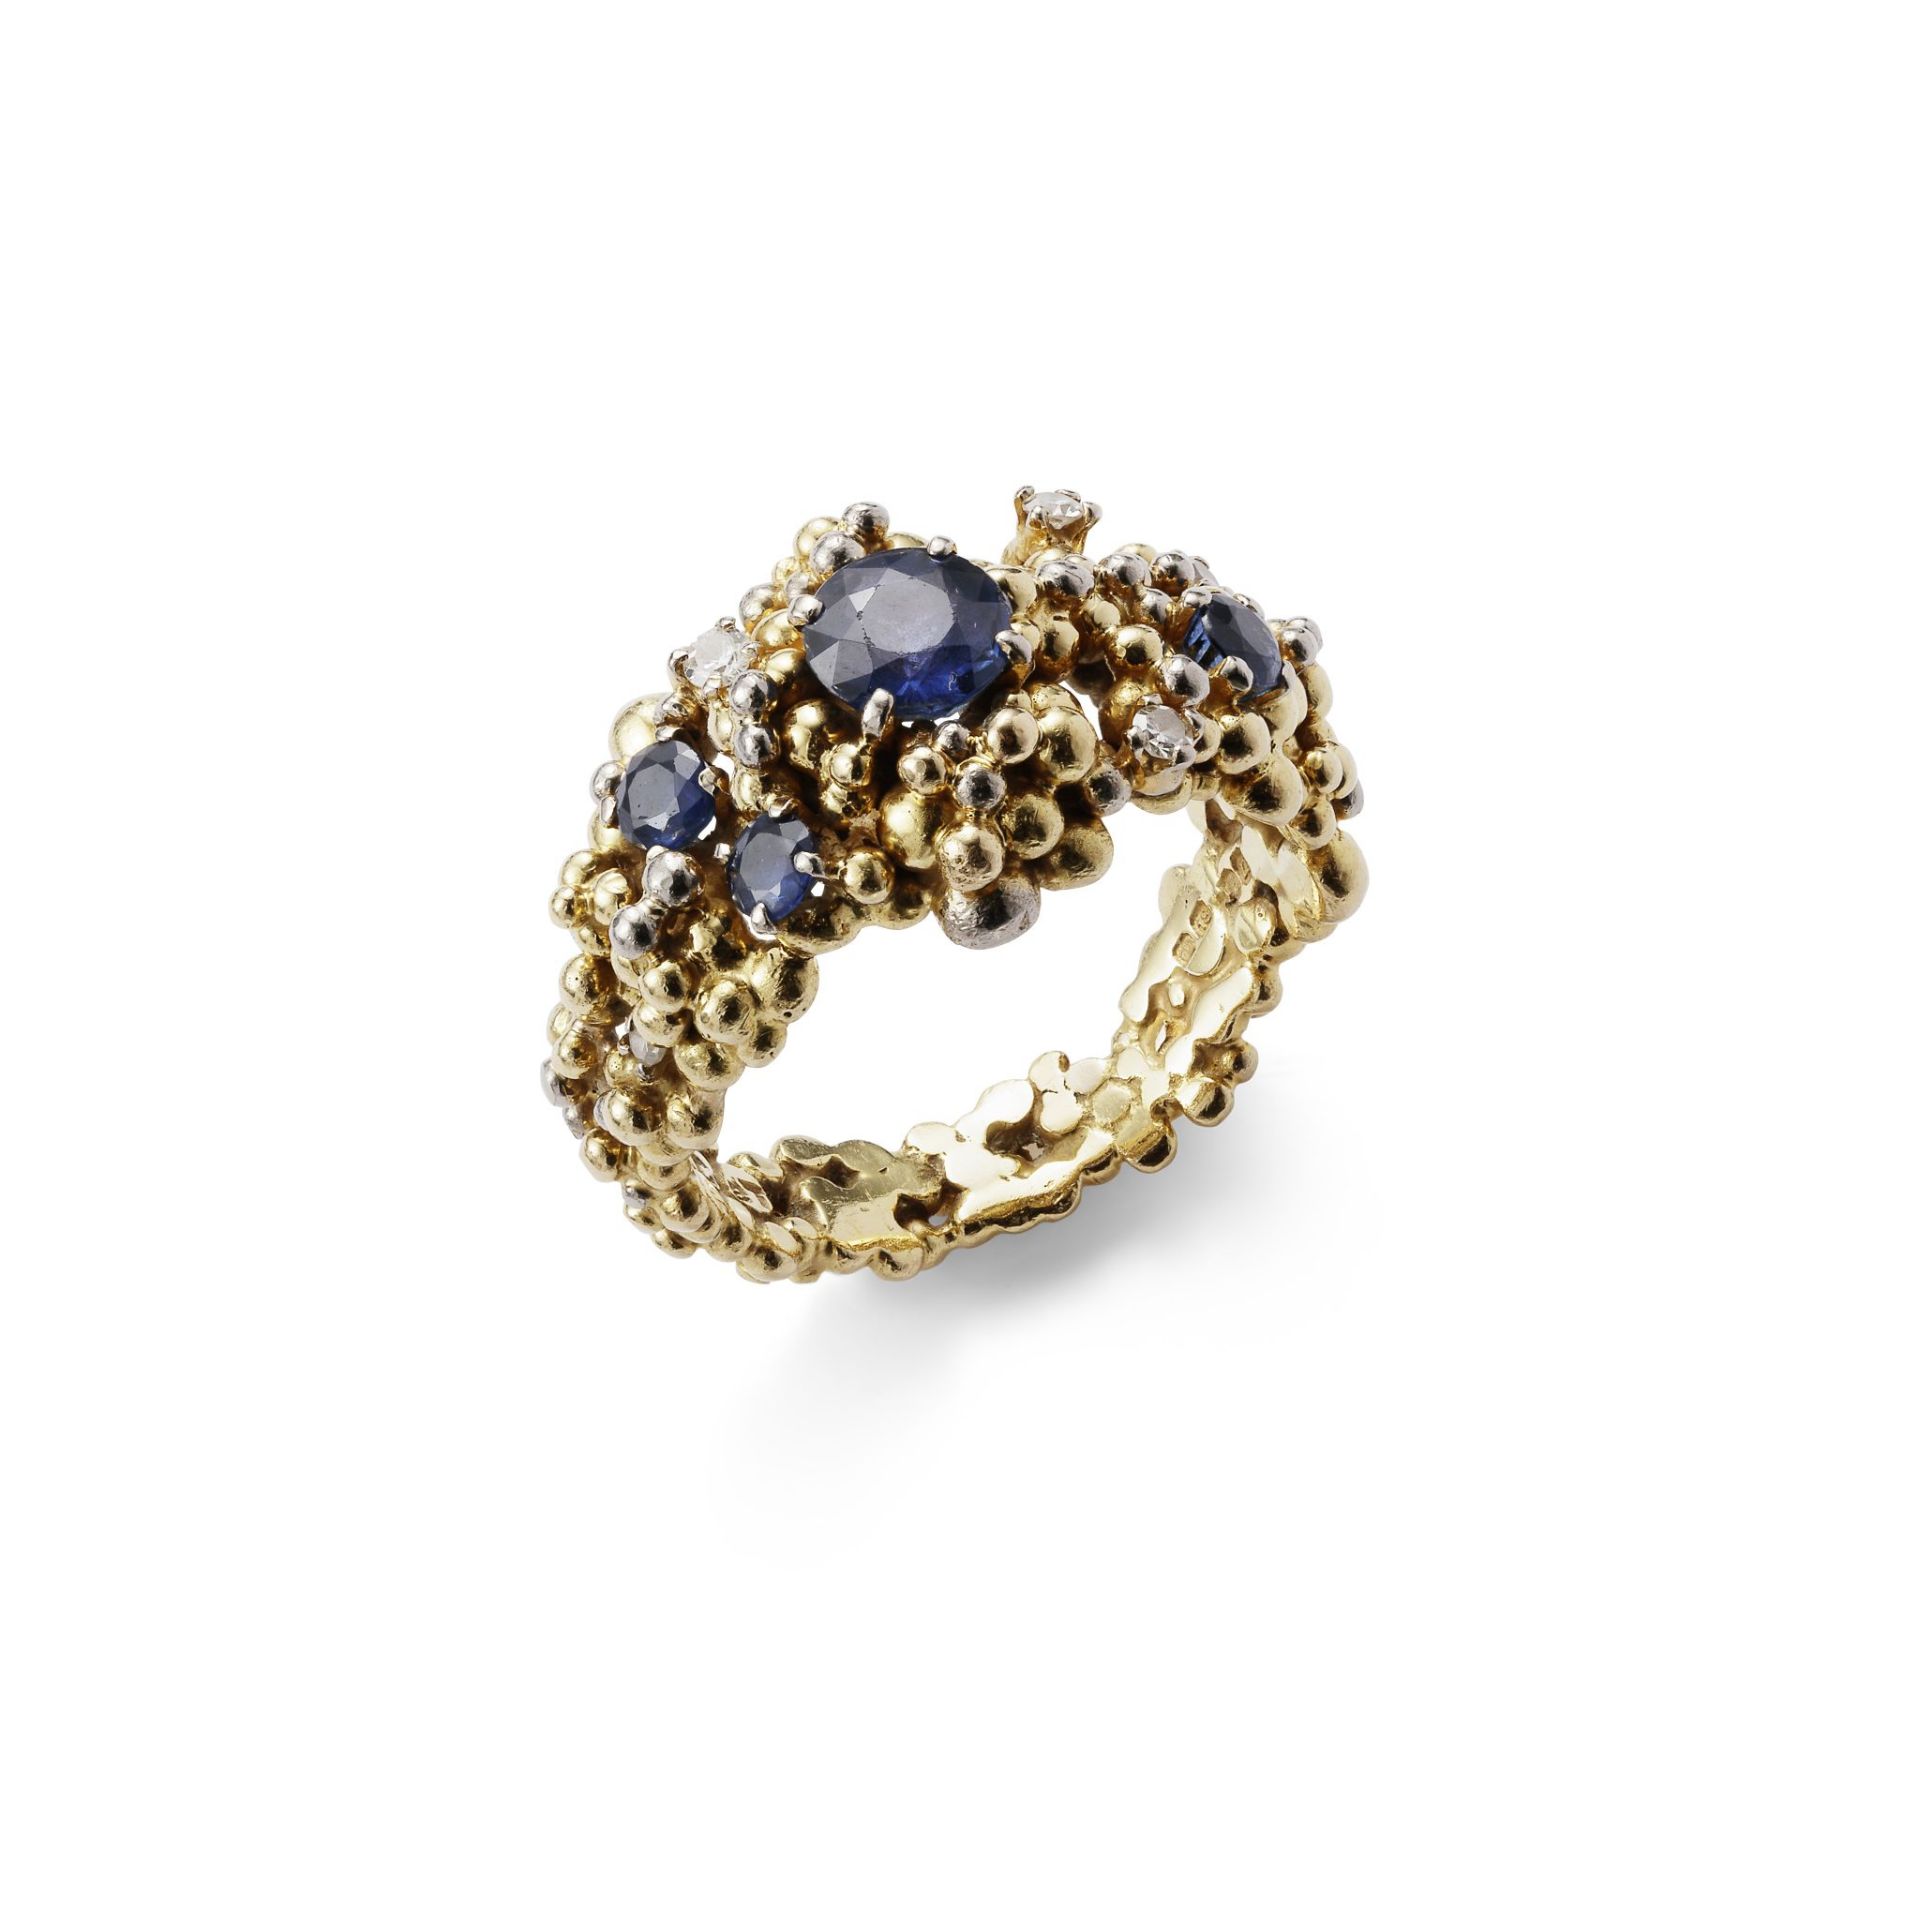 A SAPPHIRE AND DIAMOND-SET RING, BY CHARLES DE TEMPLE, 1968